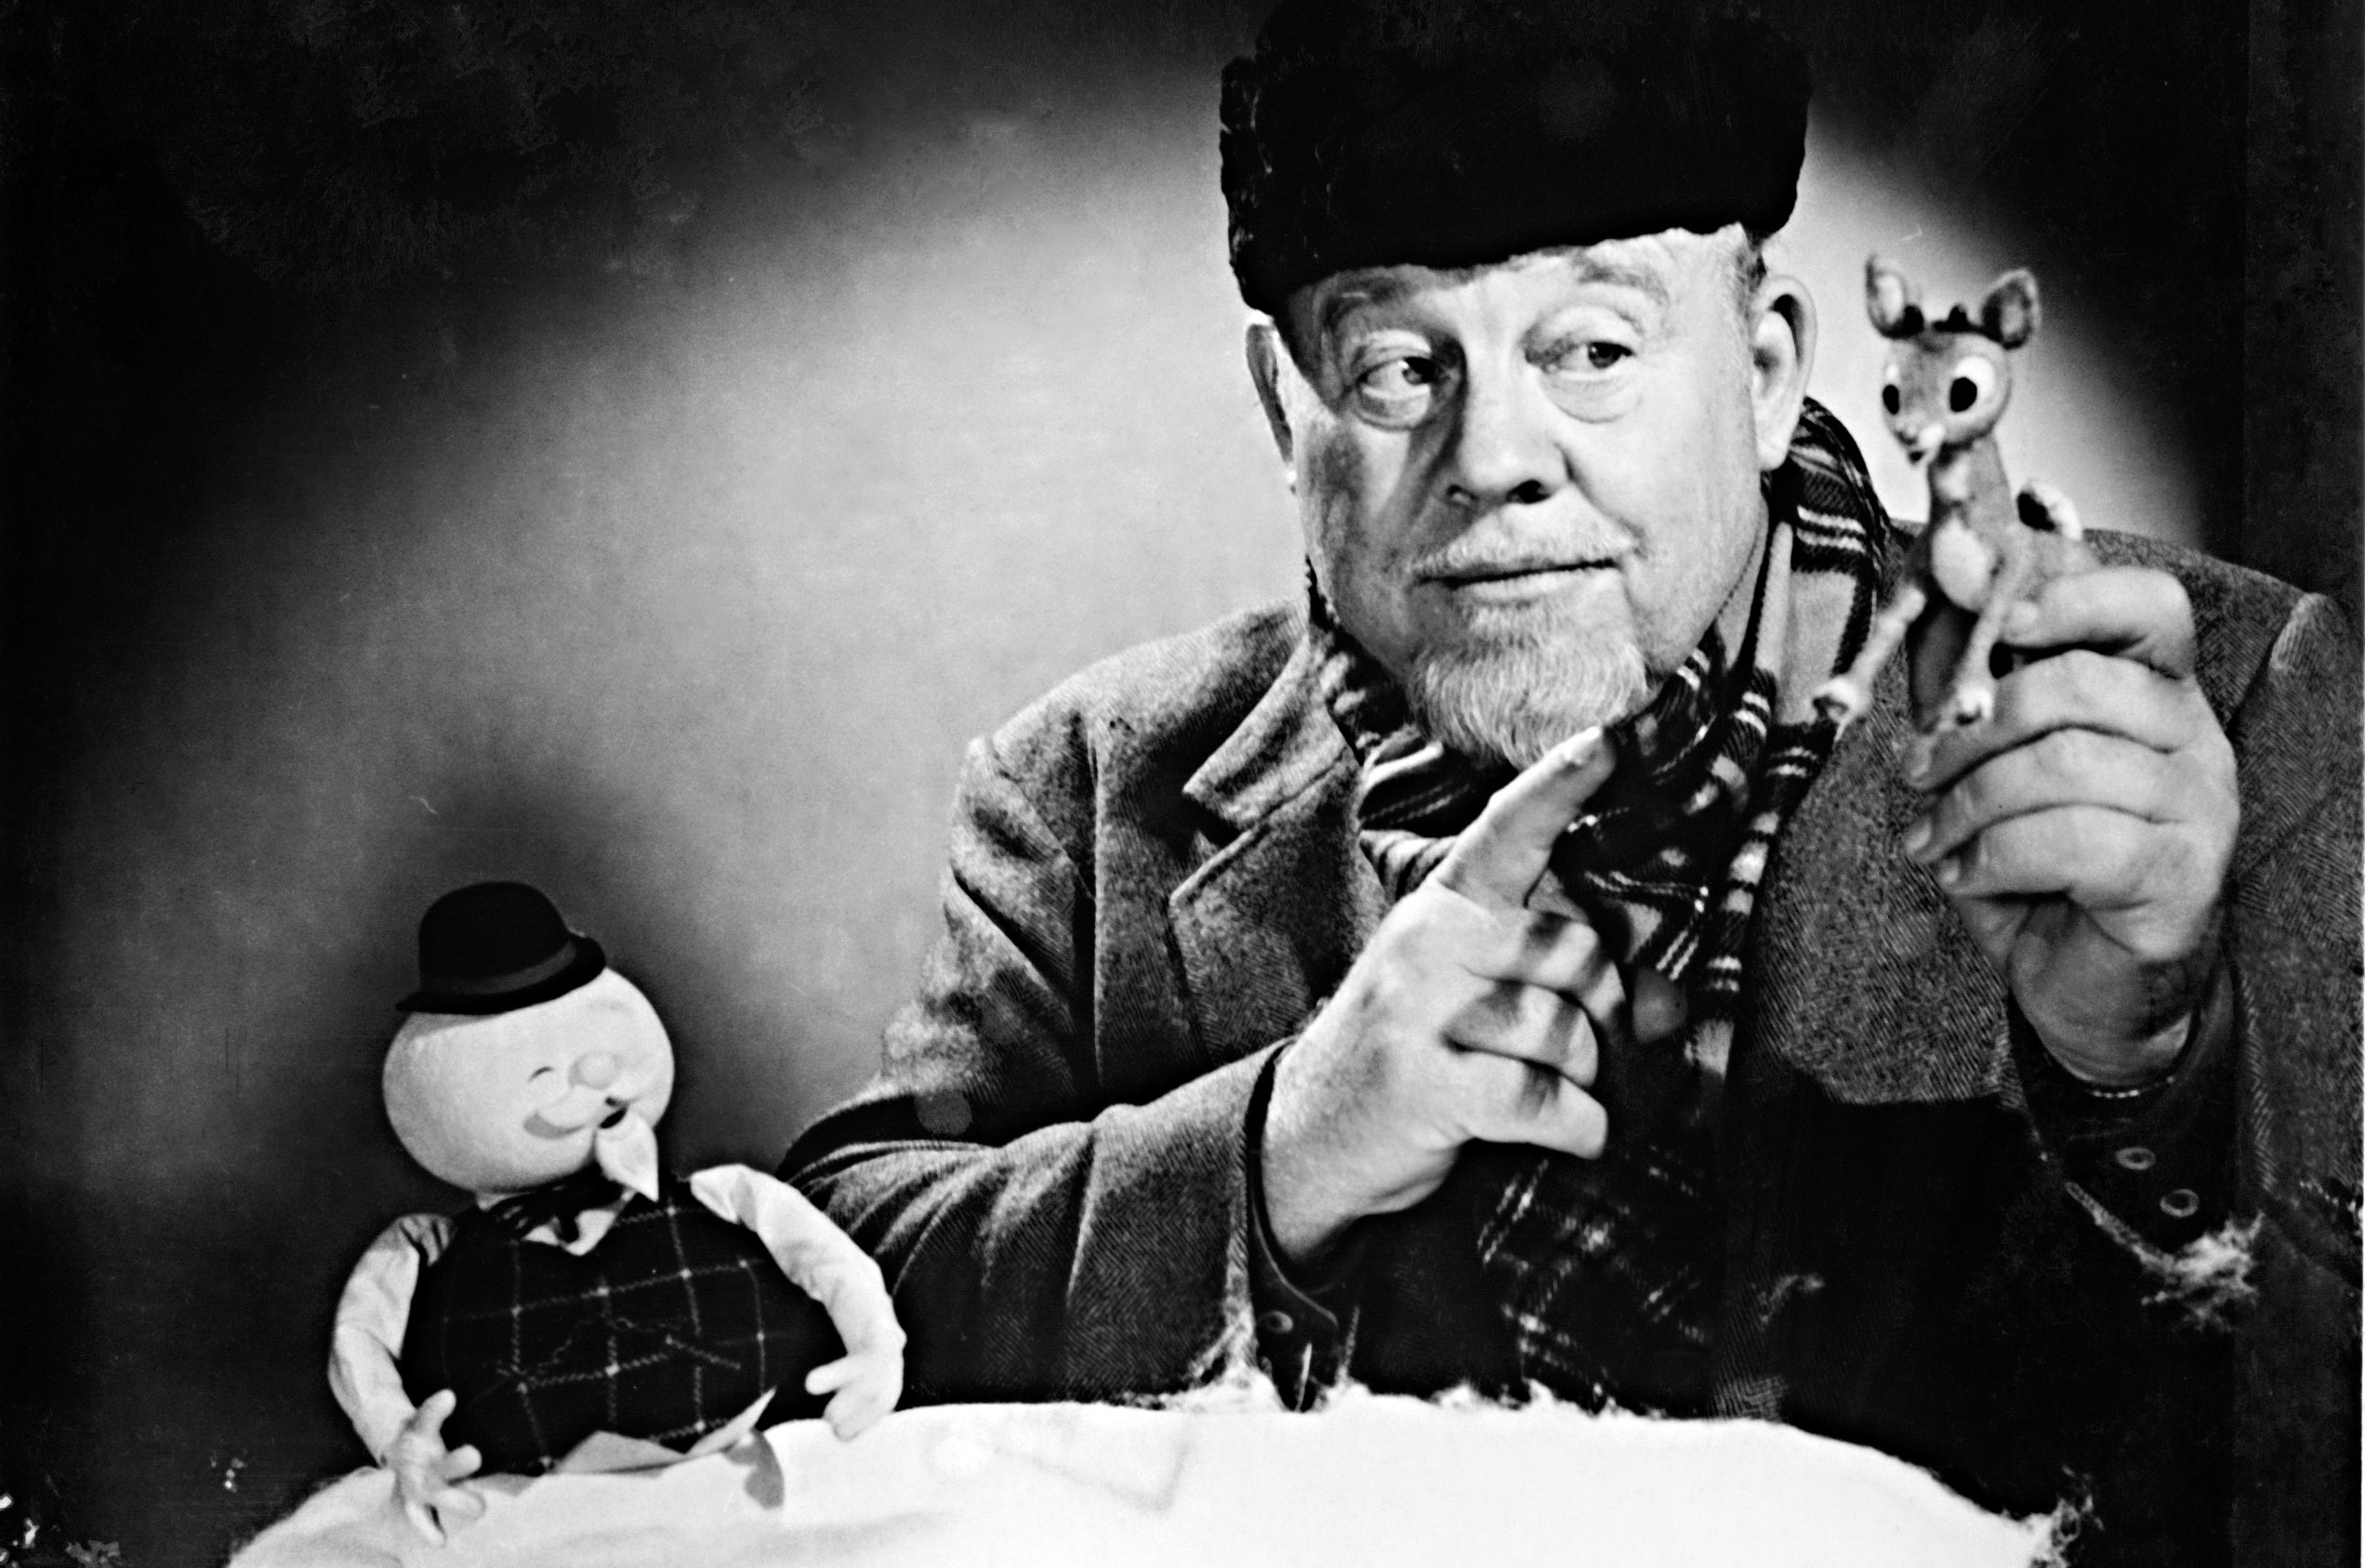 RUDOLPH, THE RED-NOSED REINDEER, with Burl Ives, as Sam the Snowman, 1964.